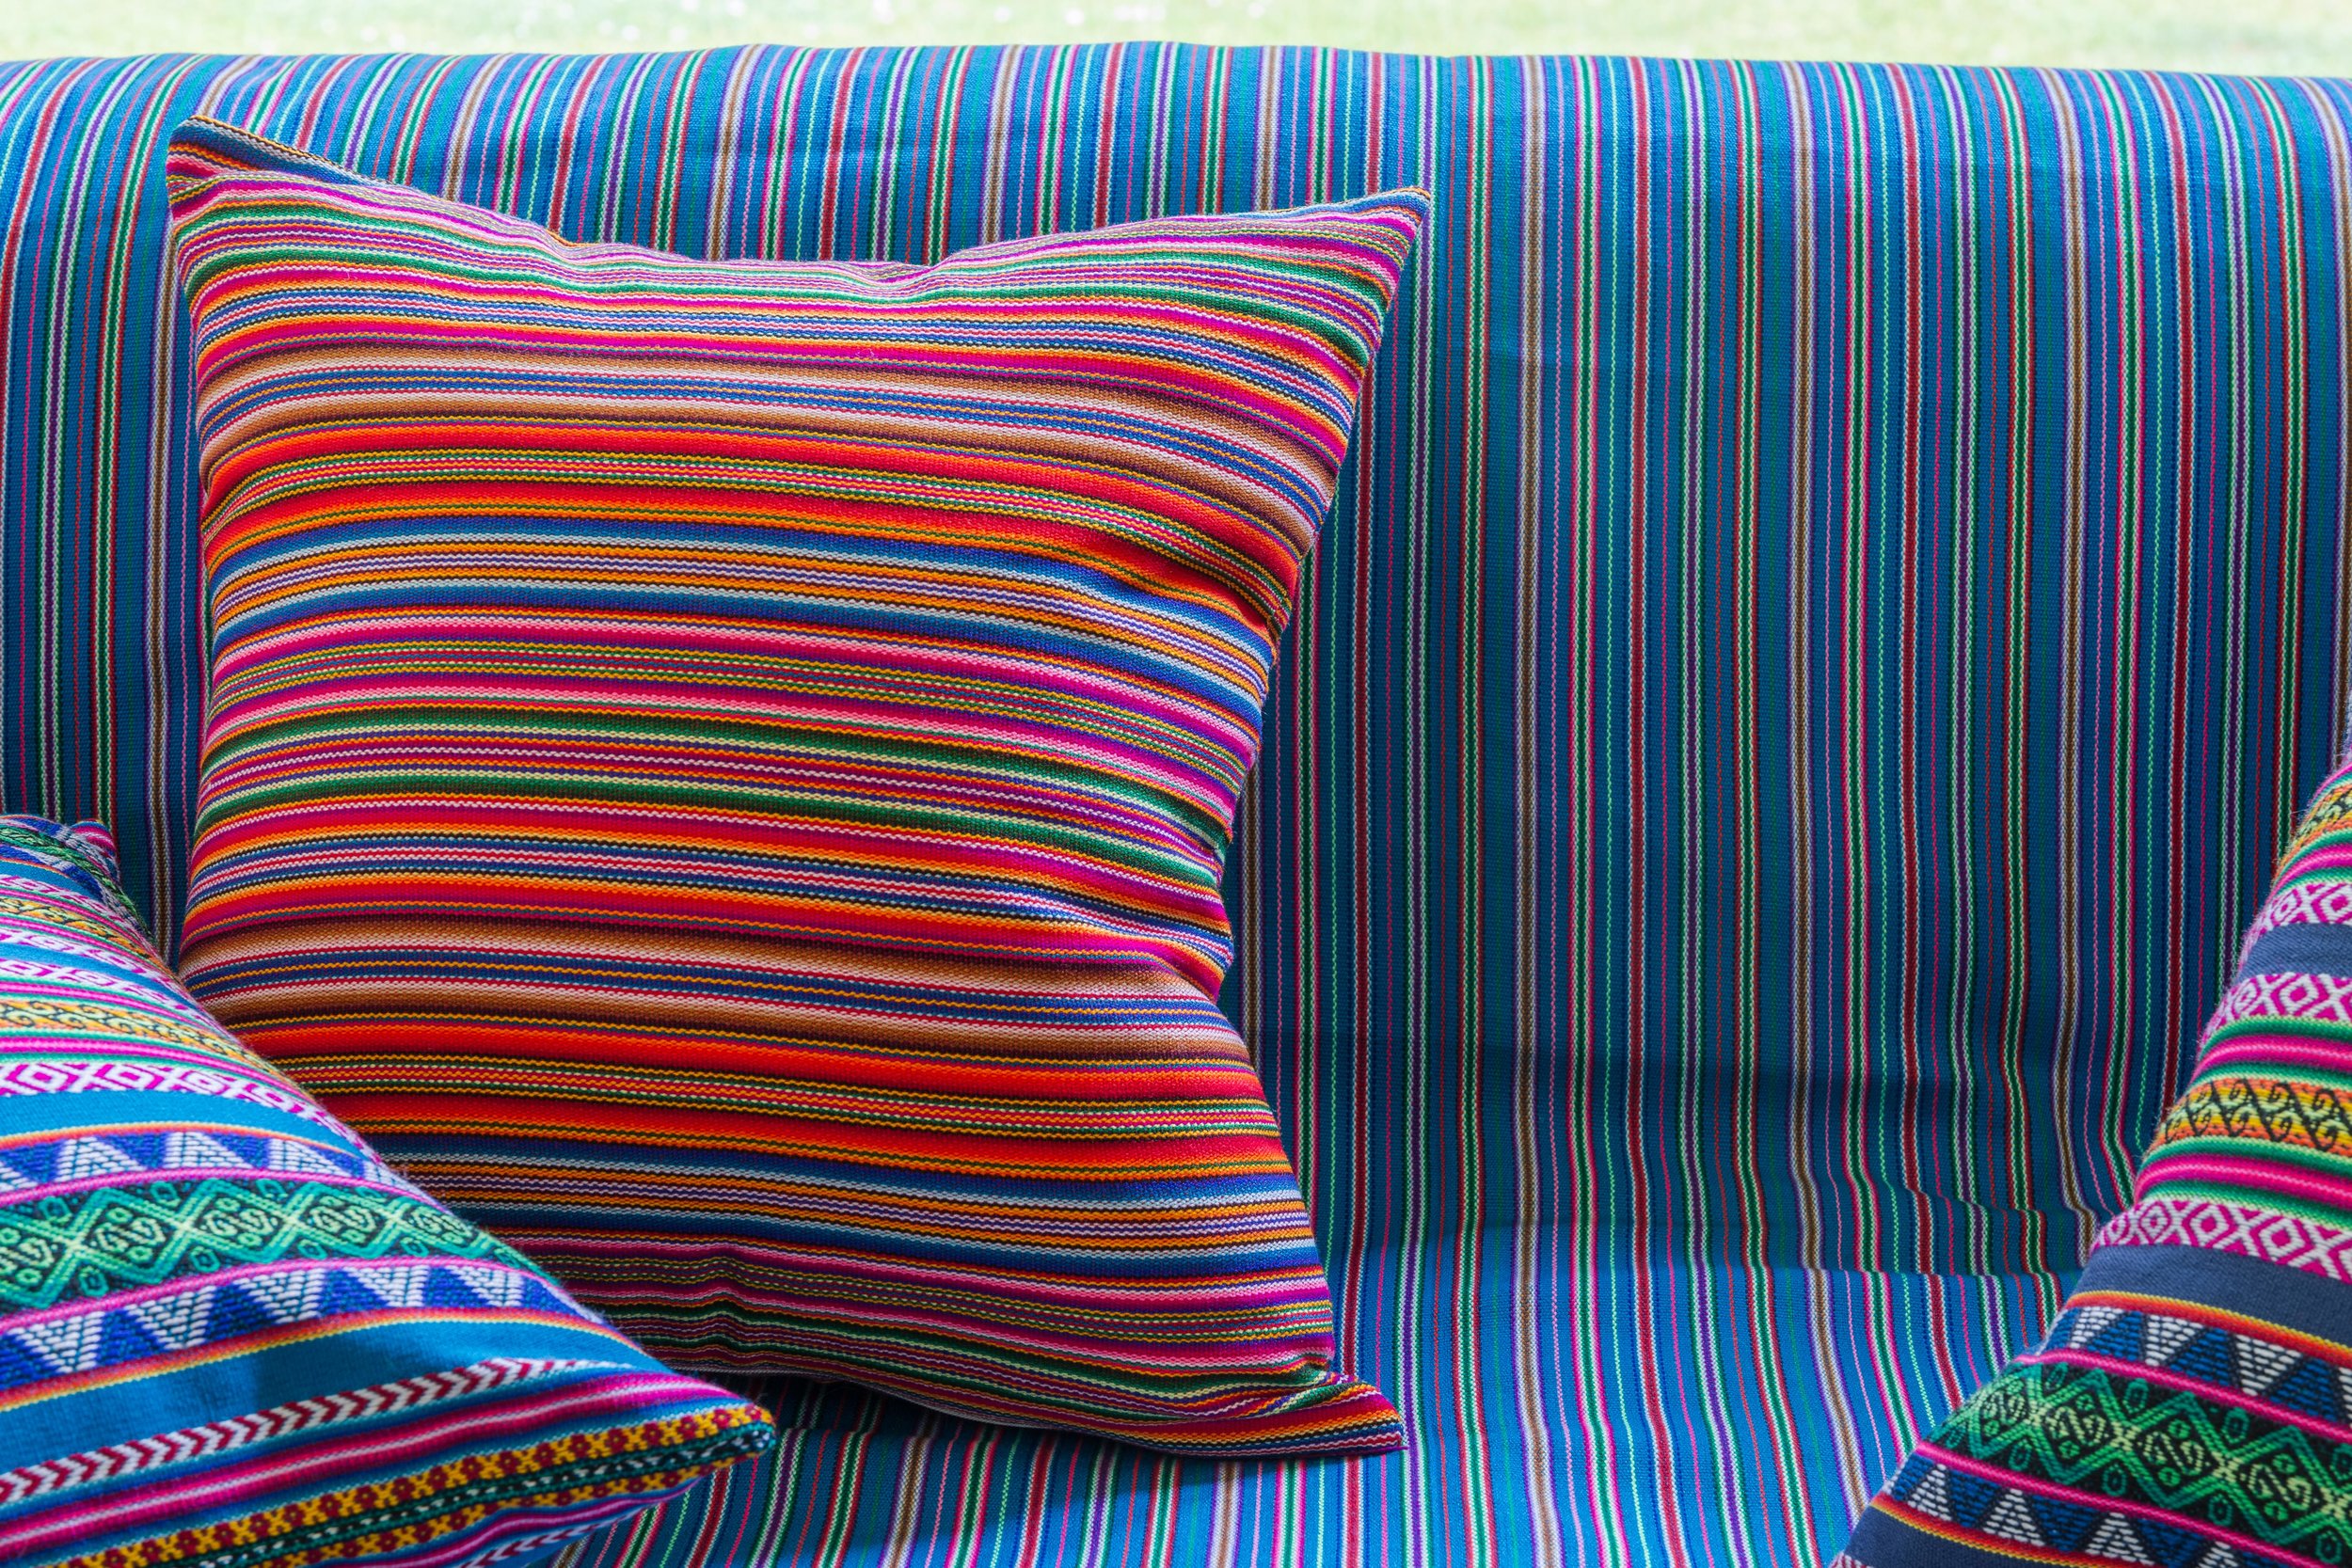 adjamee_decoration_coussin_banquette-arequipa-coussin-plaid.jpg